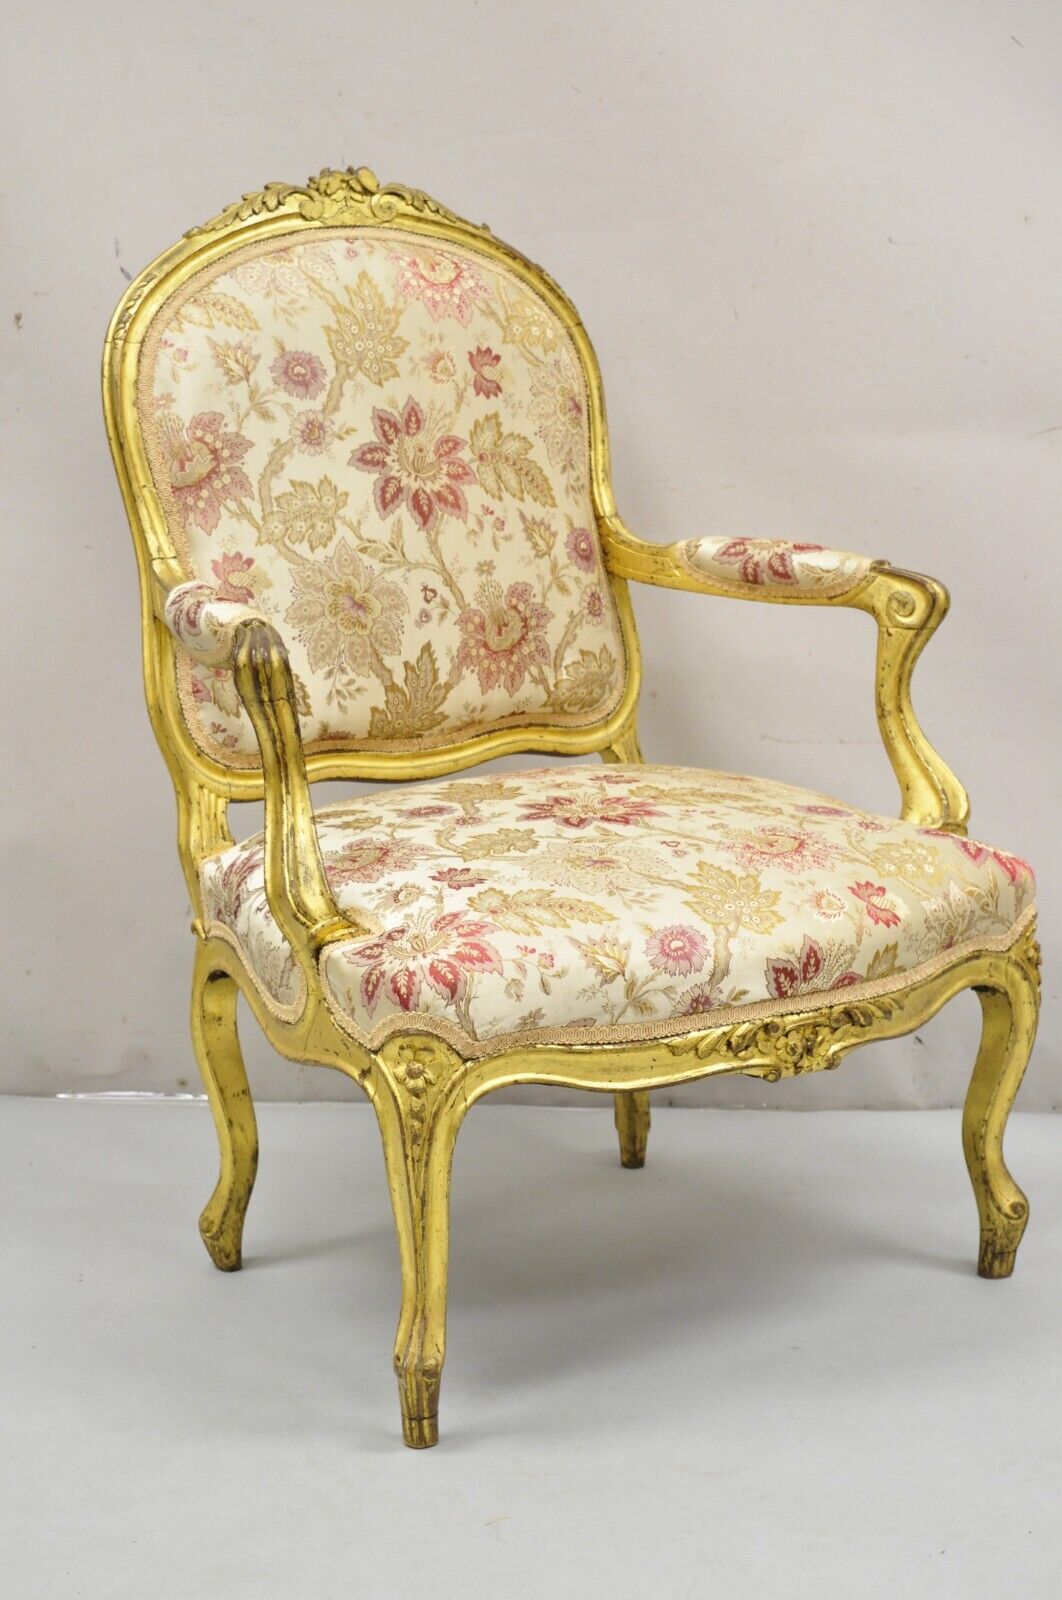 Antique French Louis XV Style Gold Giltwood Floral Carved Upholstered Arm Chair